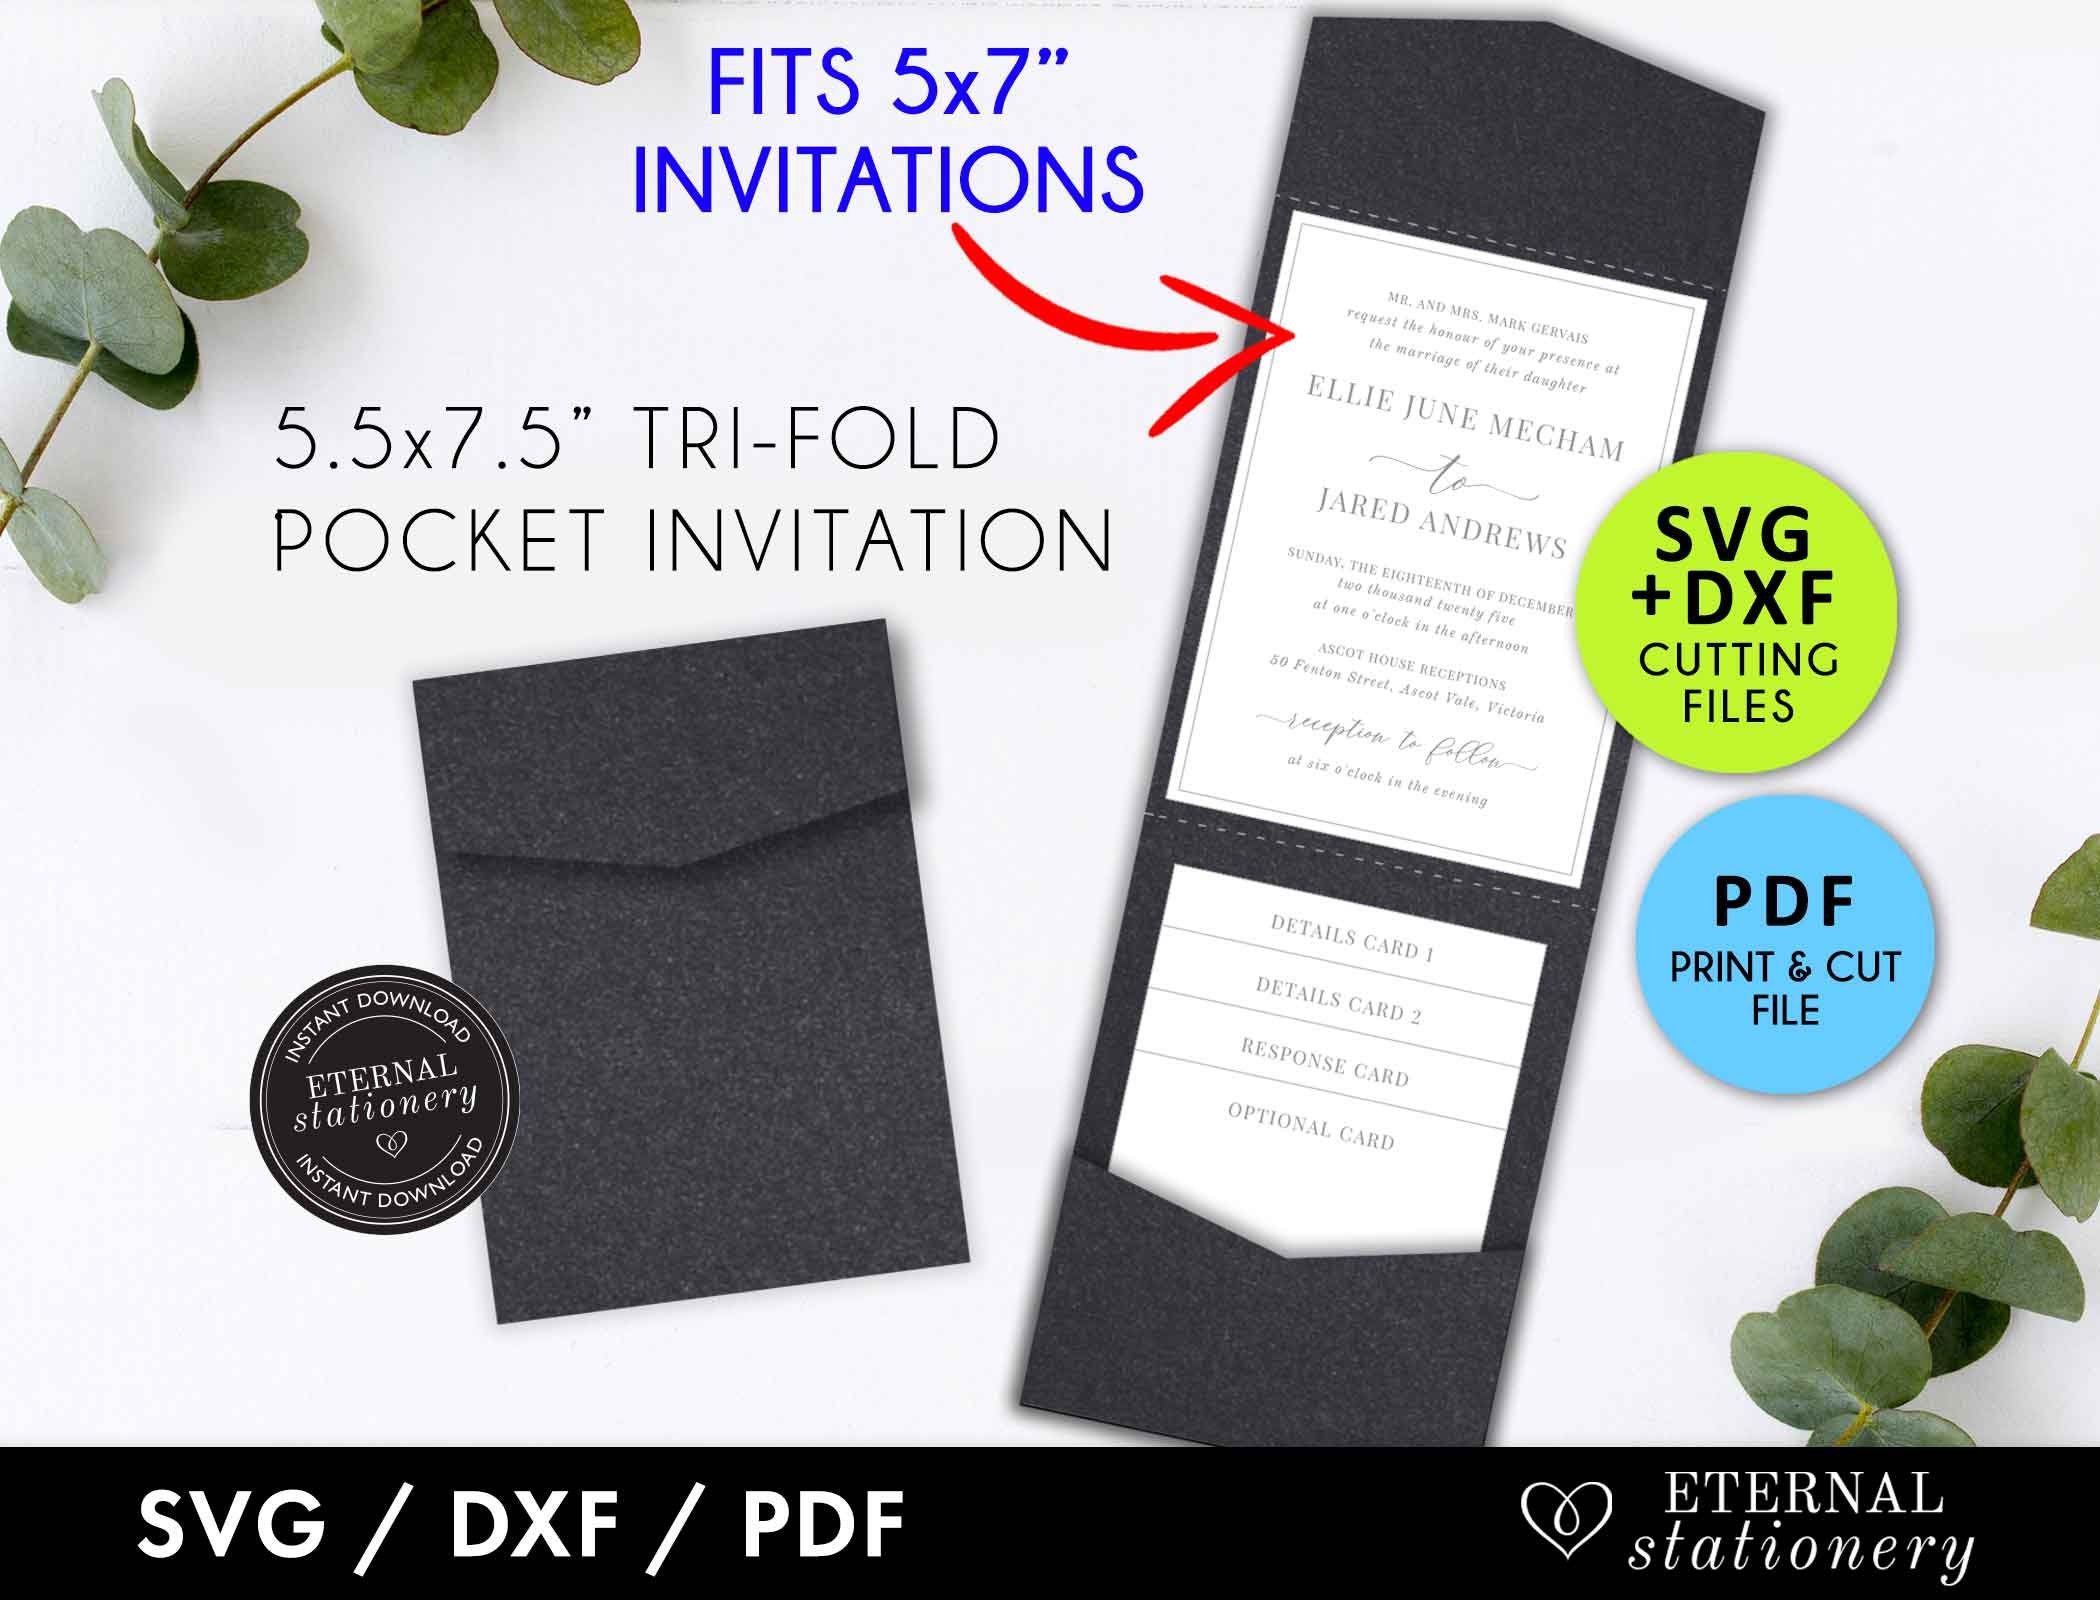 50 Wedding Invitation Cards size 5X7 Printed in Black with Envelopes